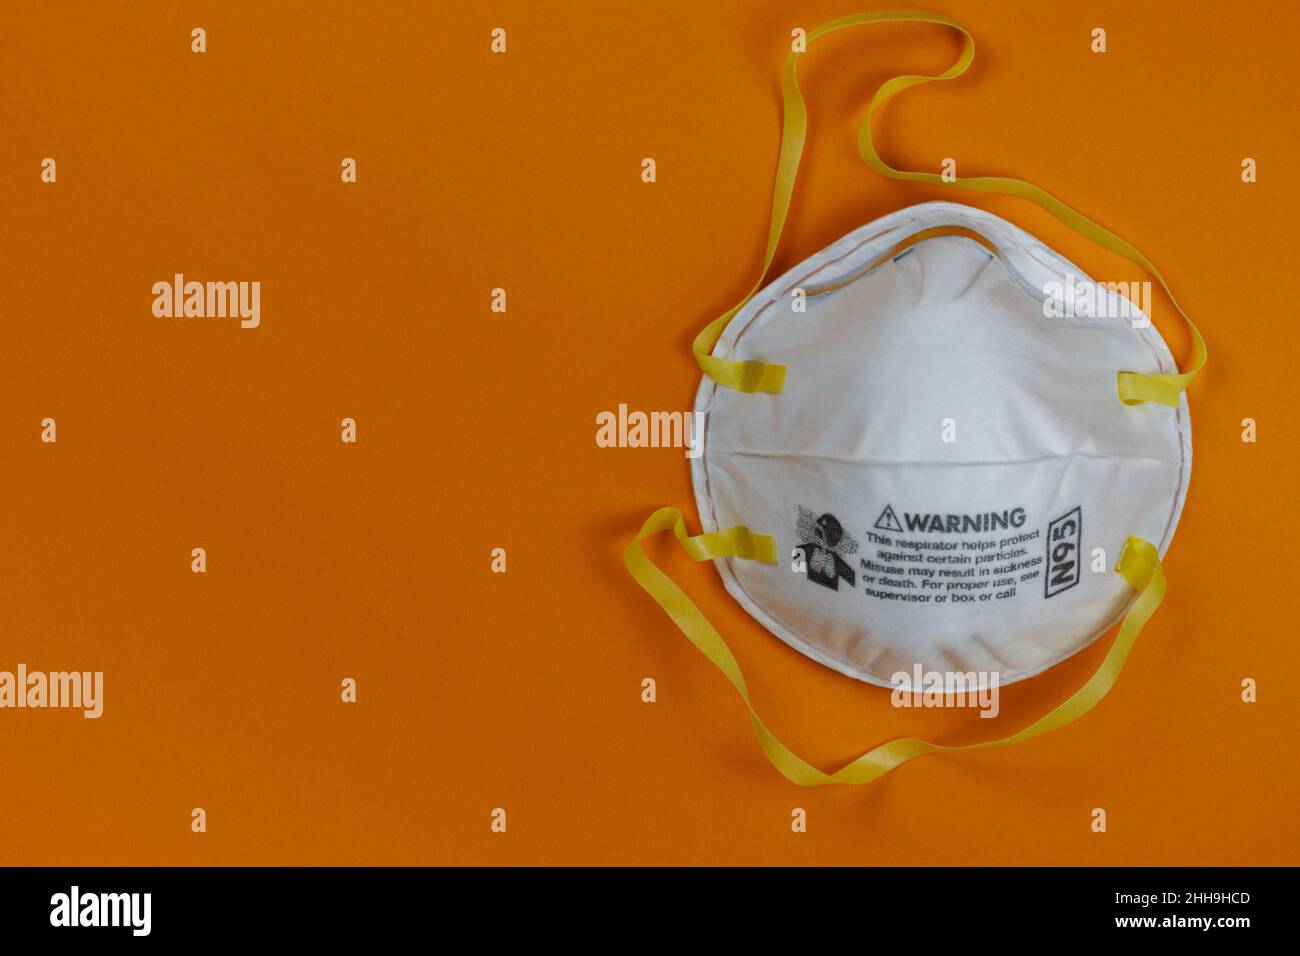 N95 face respirator face mask on a bright orange background with copy space Stock Photo